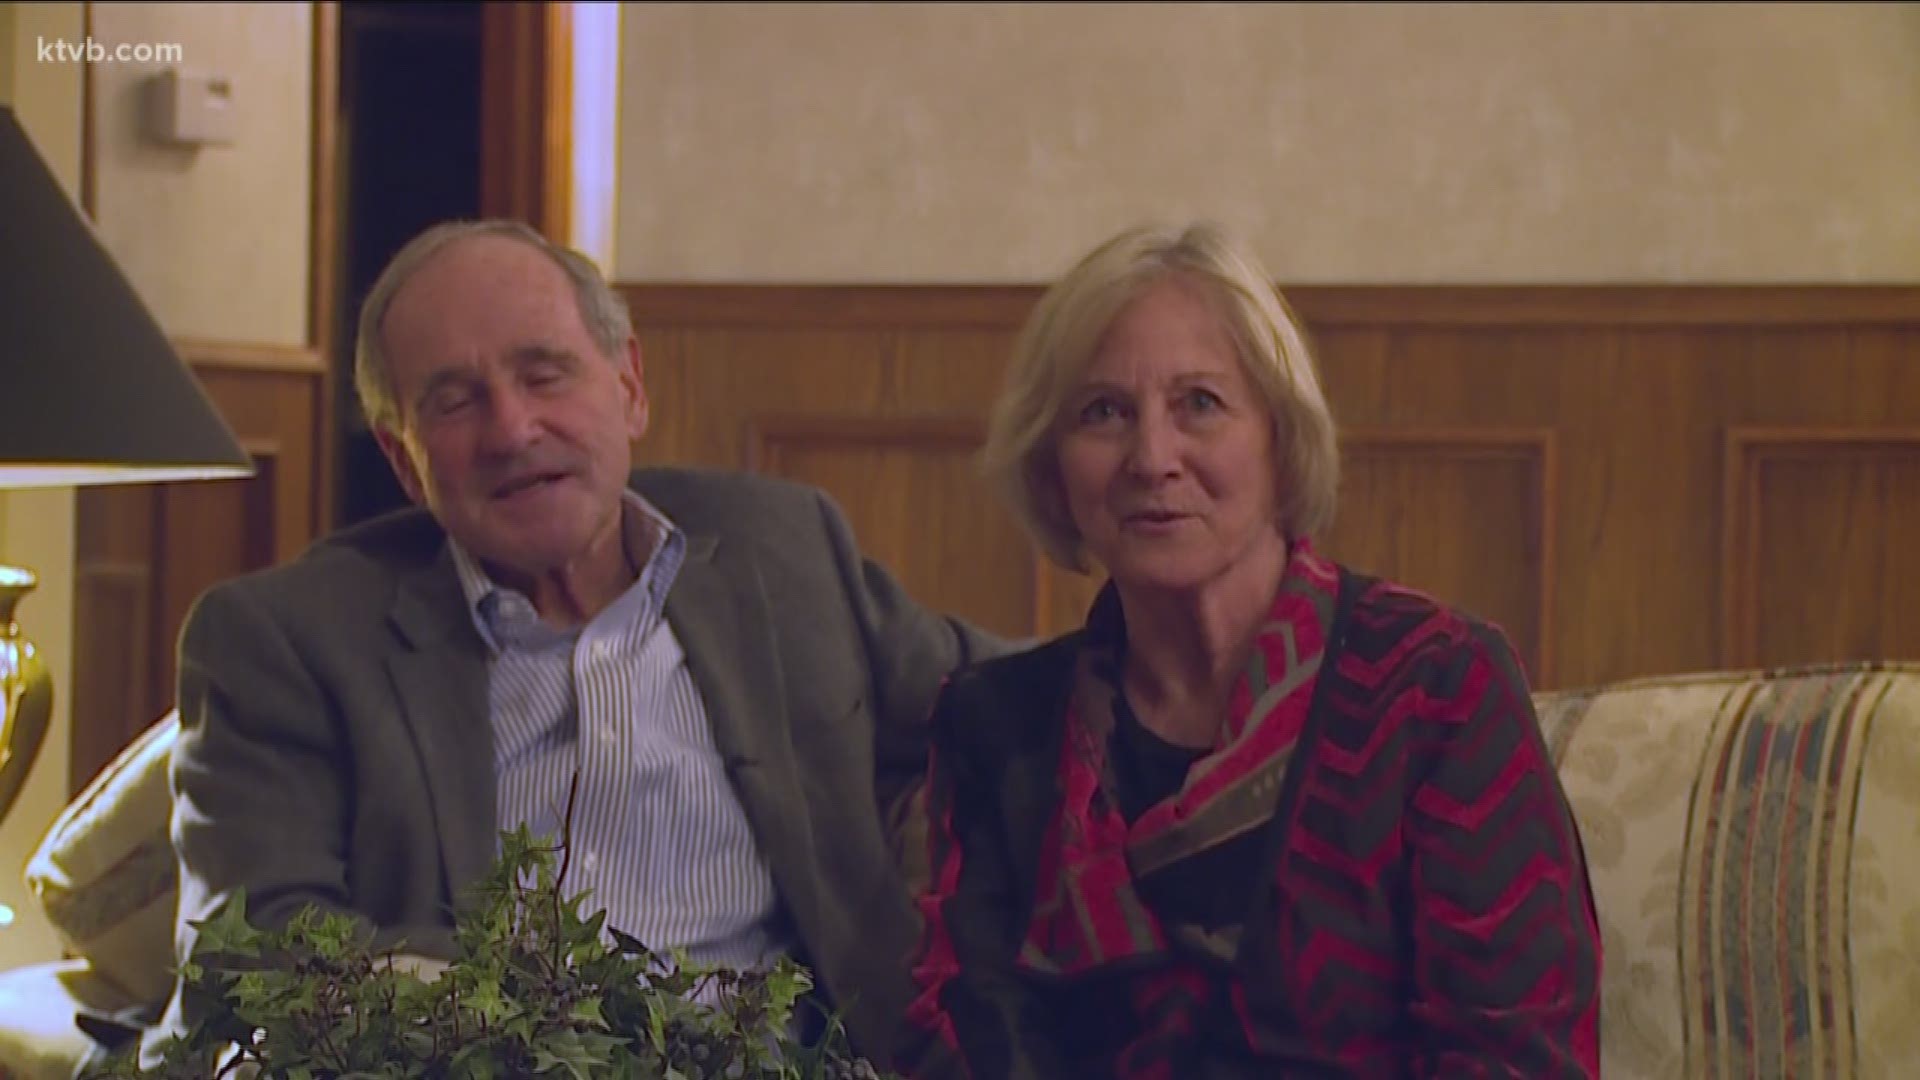 Idaho Senator Jim Risch and his wife Vicki shared their favorite memories of former President George H.W. Bush, who passed away at the age of 94 on Friday.